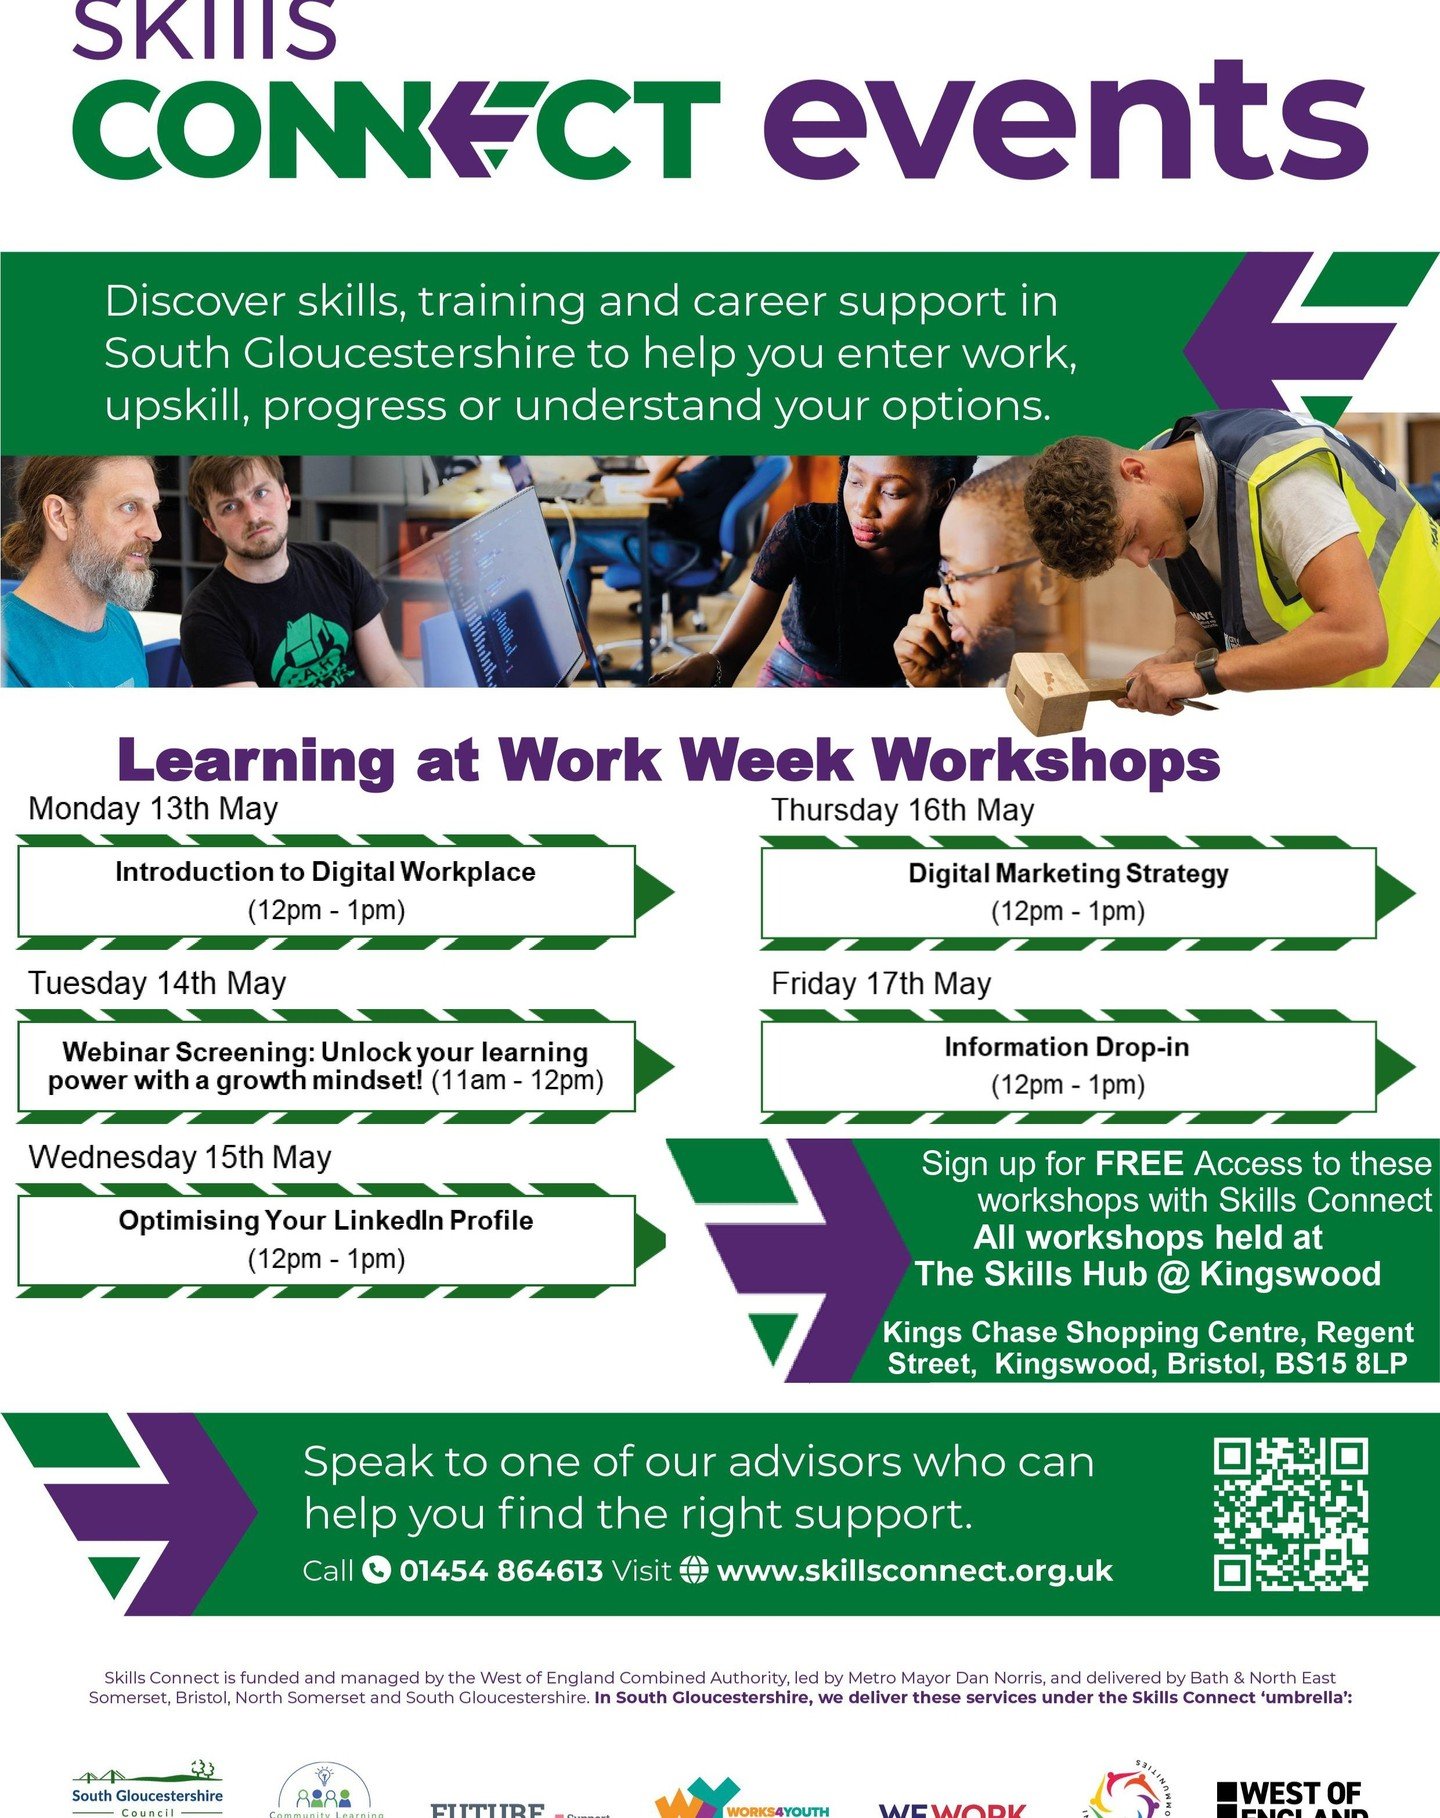 Learning at Work Week is coming up. Join us at the Skills hub in Kingswood for a series of short workshops and info sessions. 
Go to www.skillsconnect.org.uk and click on the events section to find out more!